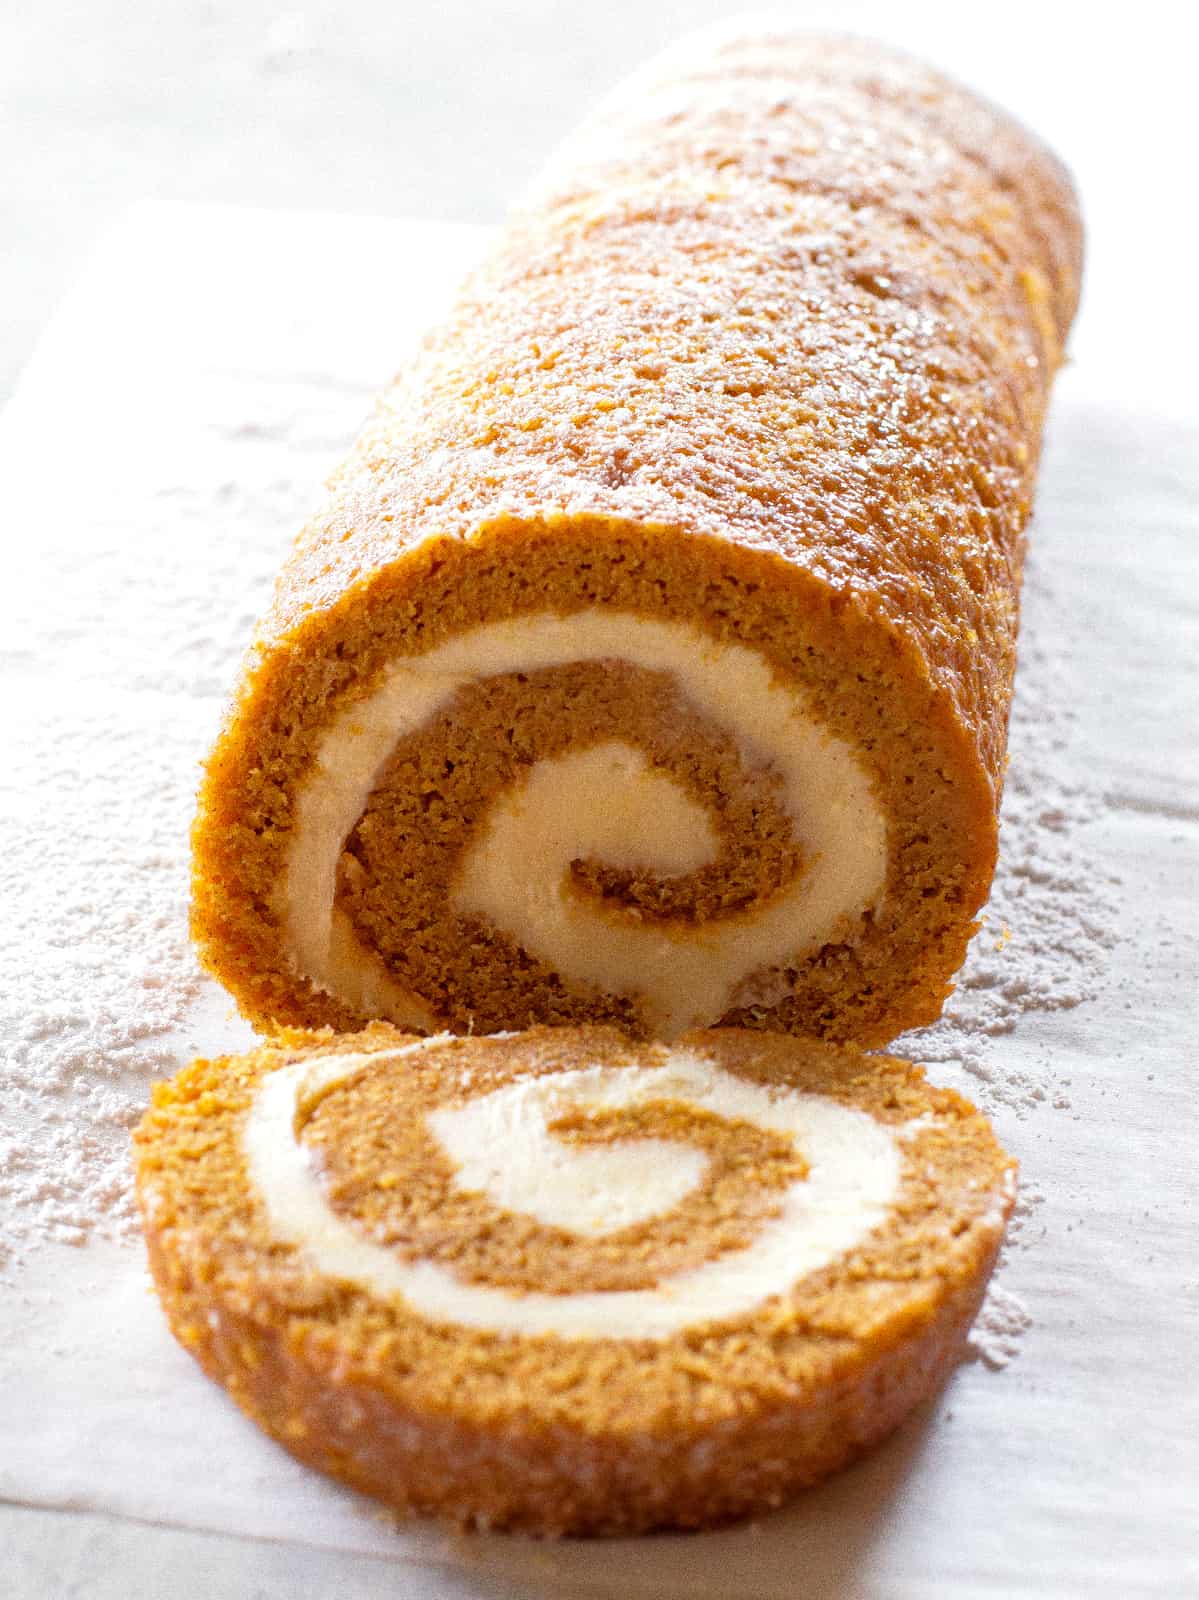 https://www.the-girl-who-ate-everything.com/wp-content/uploads/2008/11/pumpkin-roll-007.jpg